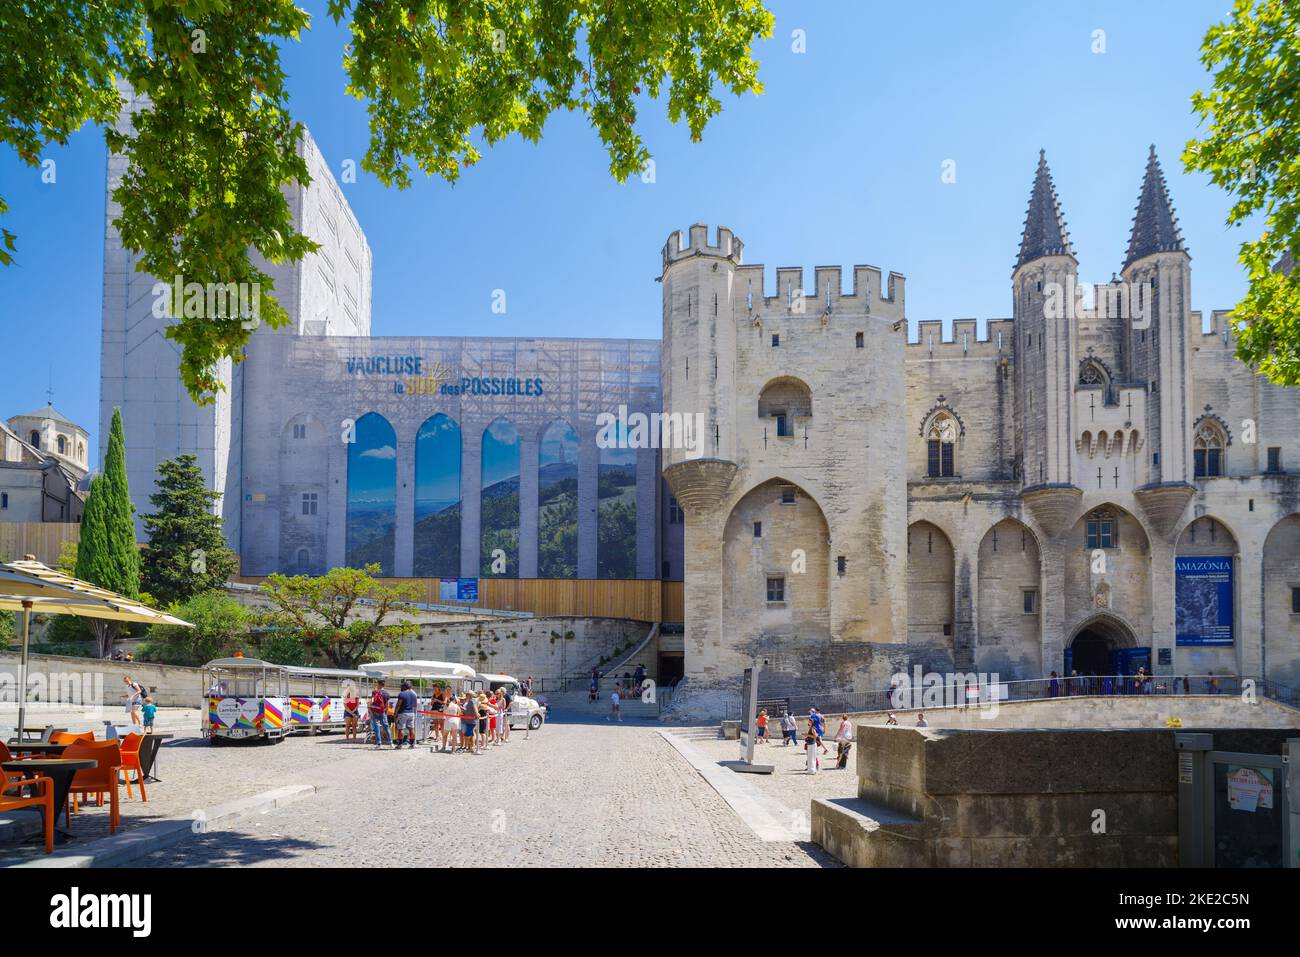 AVIGNON, FRANCE - AUGUST 4, 2022: view on former popes palace (palace des papes), one of the most important medieval gothic buildings in Europe. Stock Photo